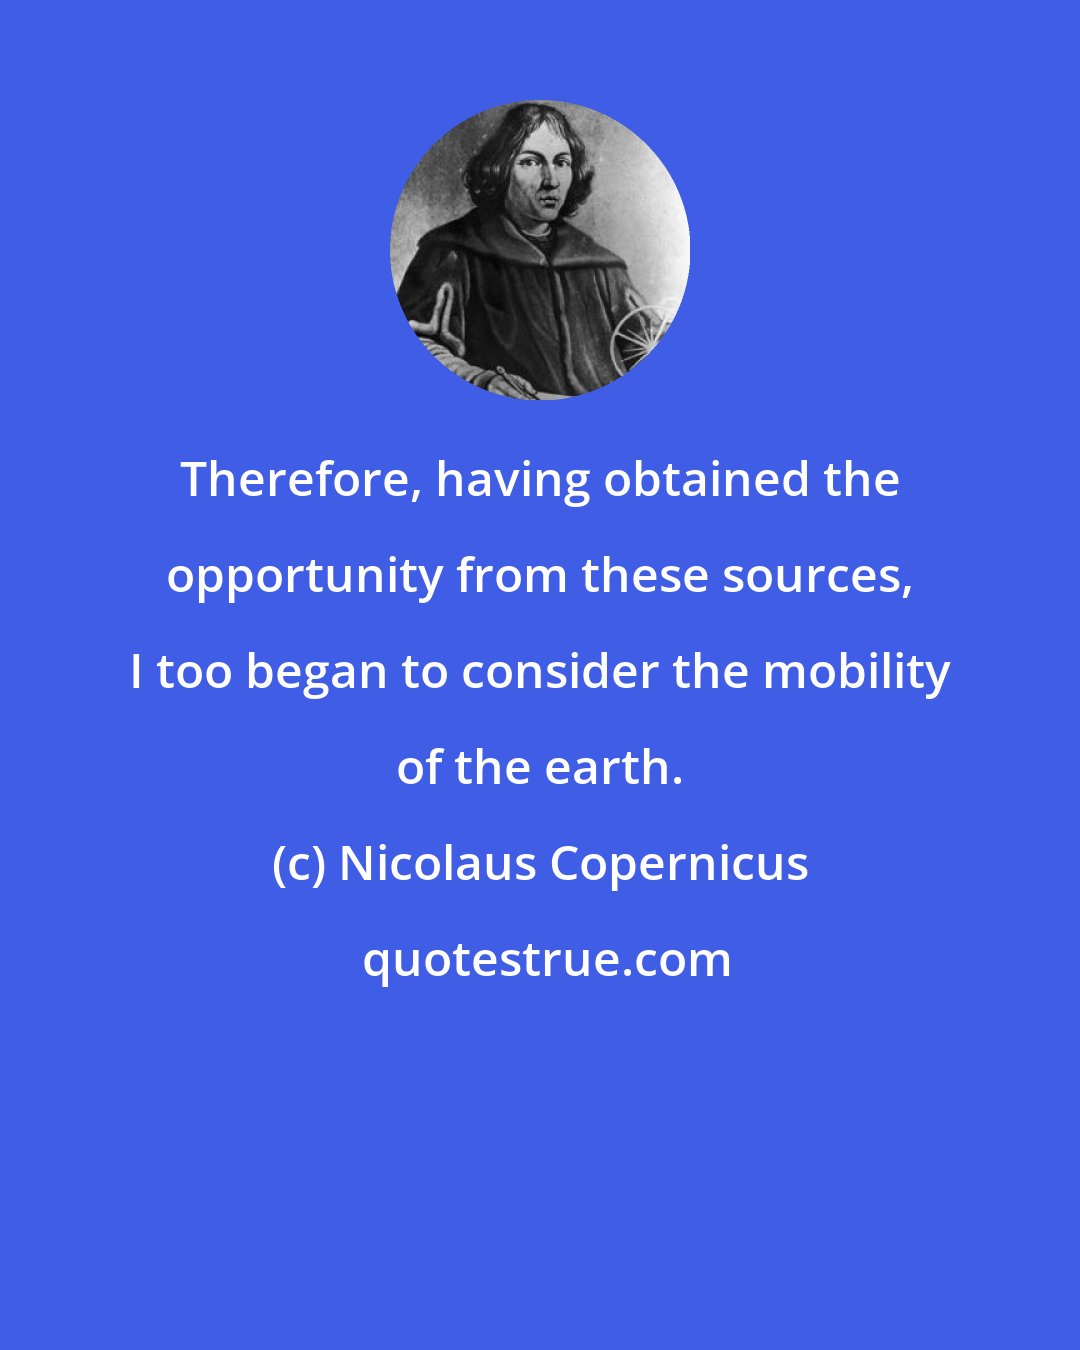 Nicolaus Copernicus: Therefore, having obtained the opportunity from these sources, I too began to consider the mobility of the earth.